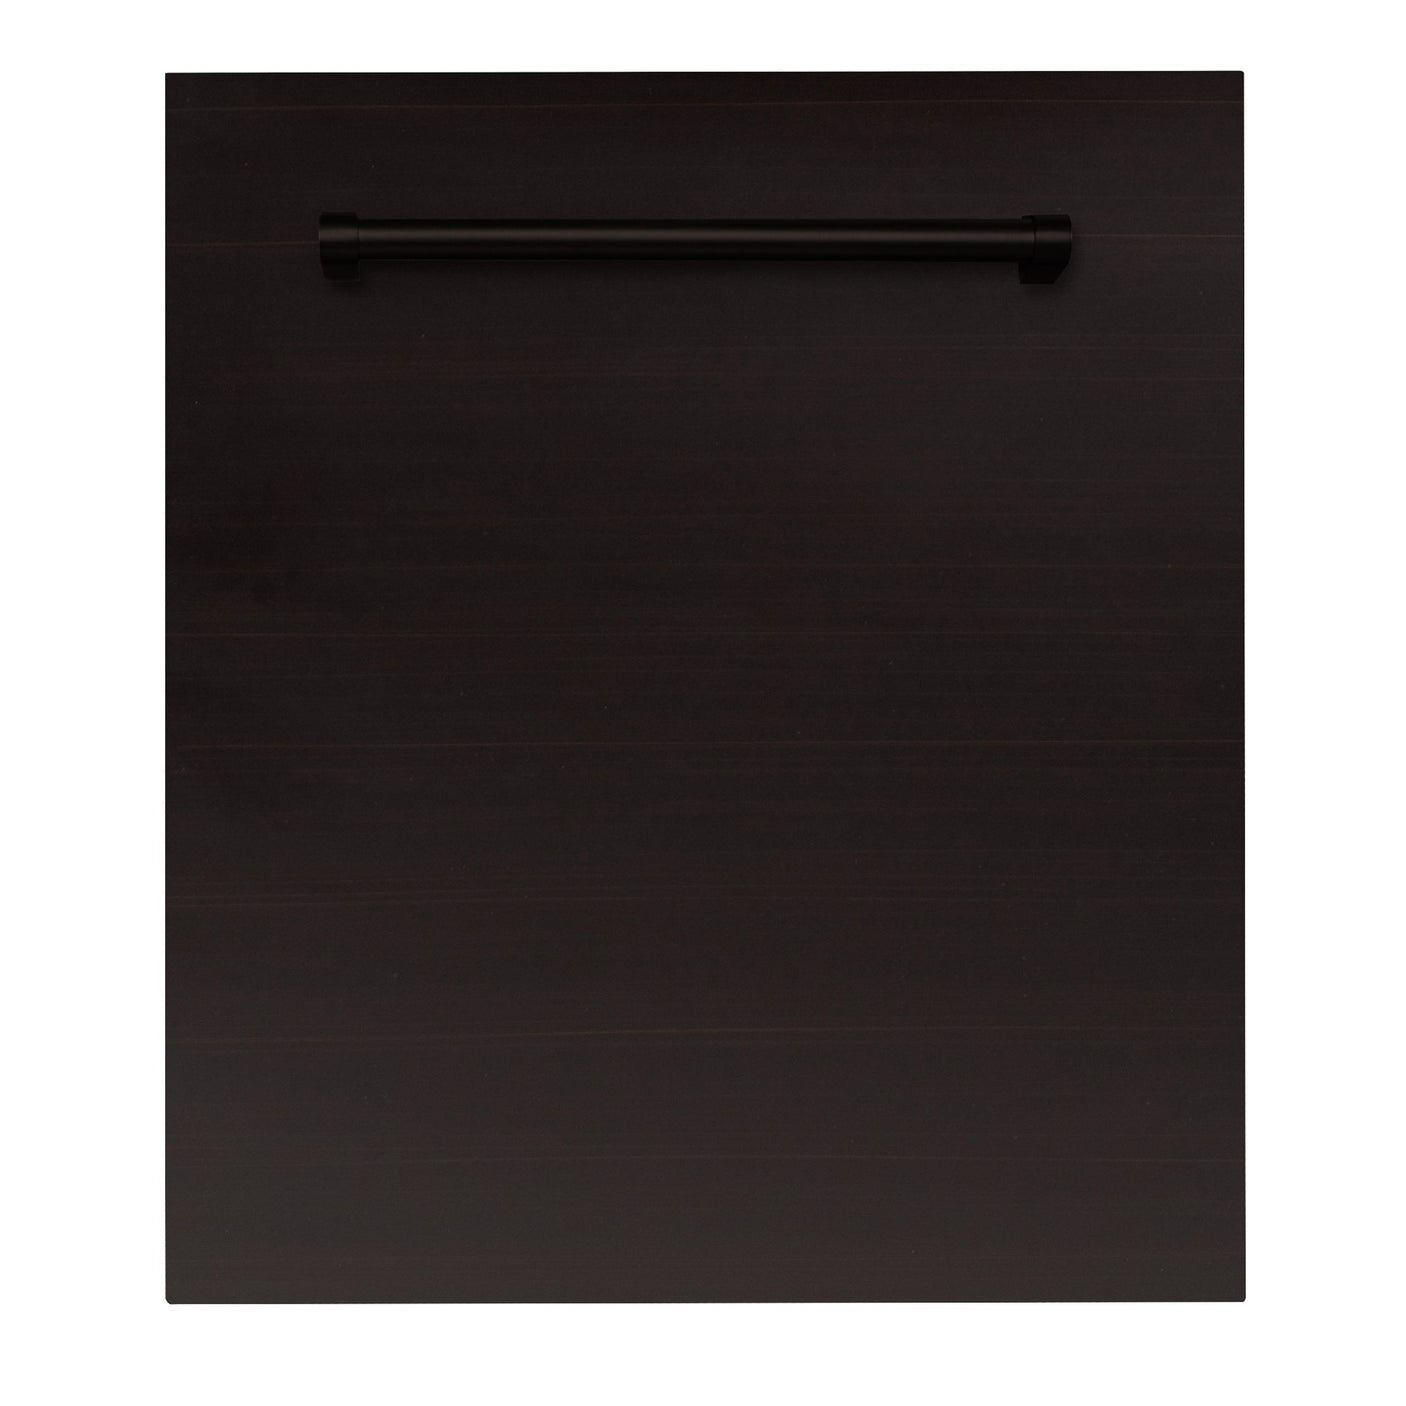 ZLINE 24 in. Dishwasher Panel with Traditional Handle (DP-H-24) [Color: Hand Hammered Copper]